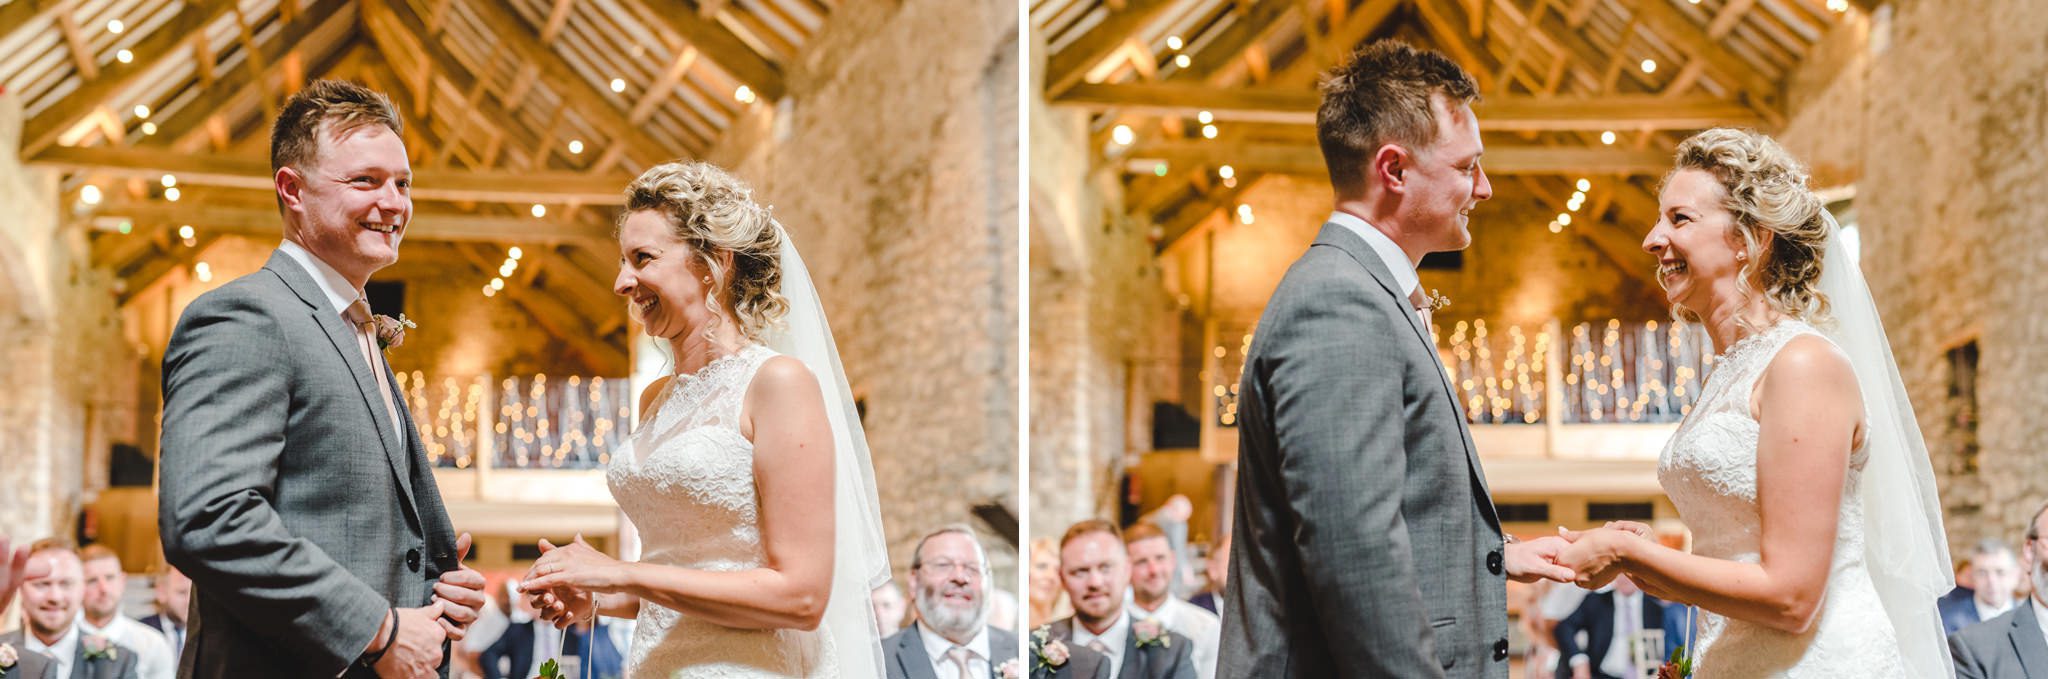 Wedding ceremony in the barn at Priston Mill